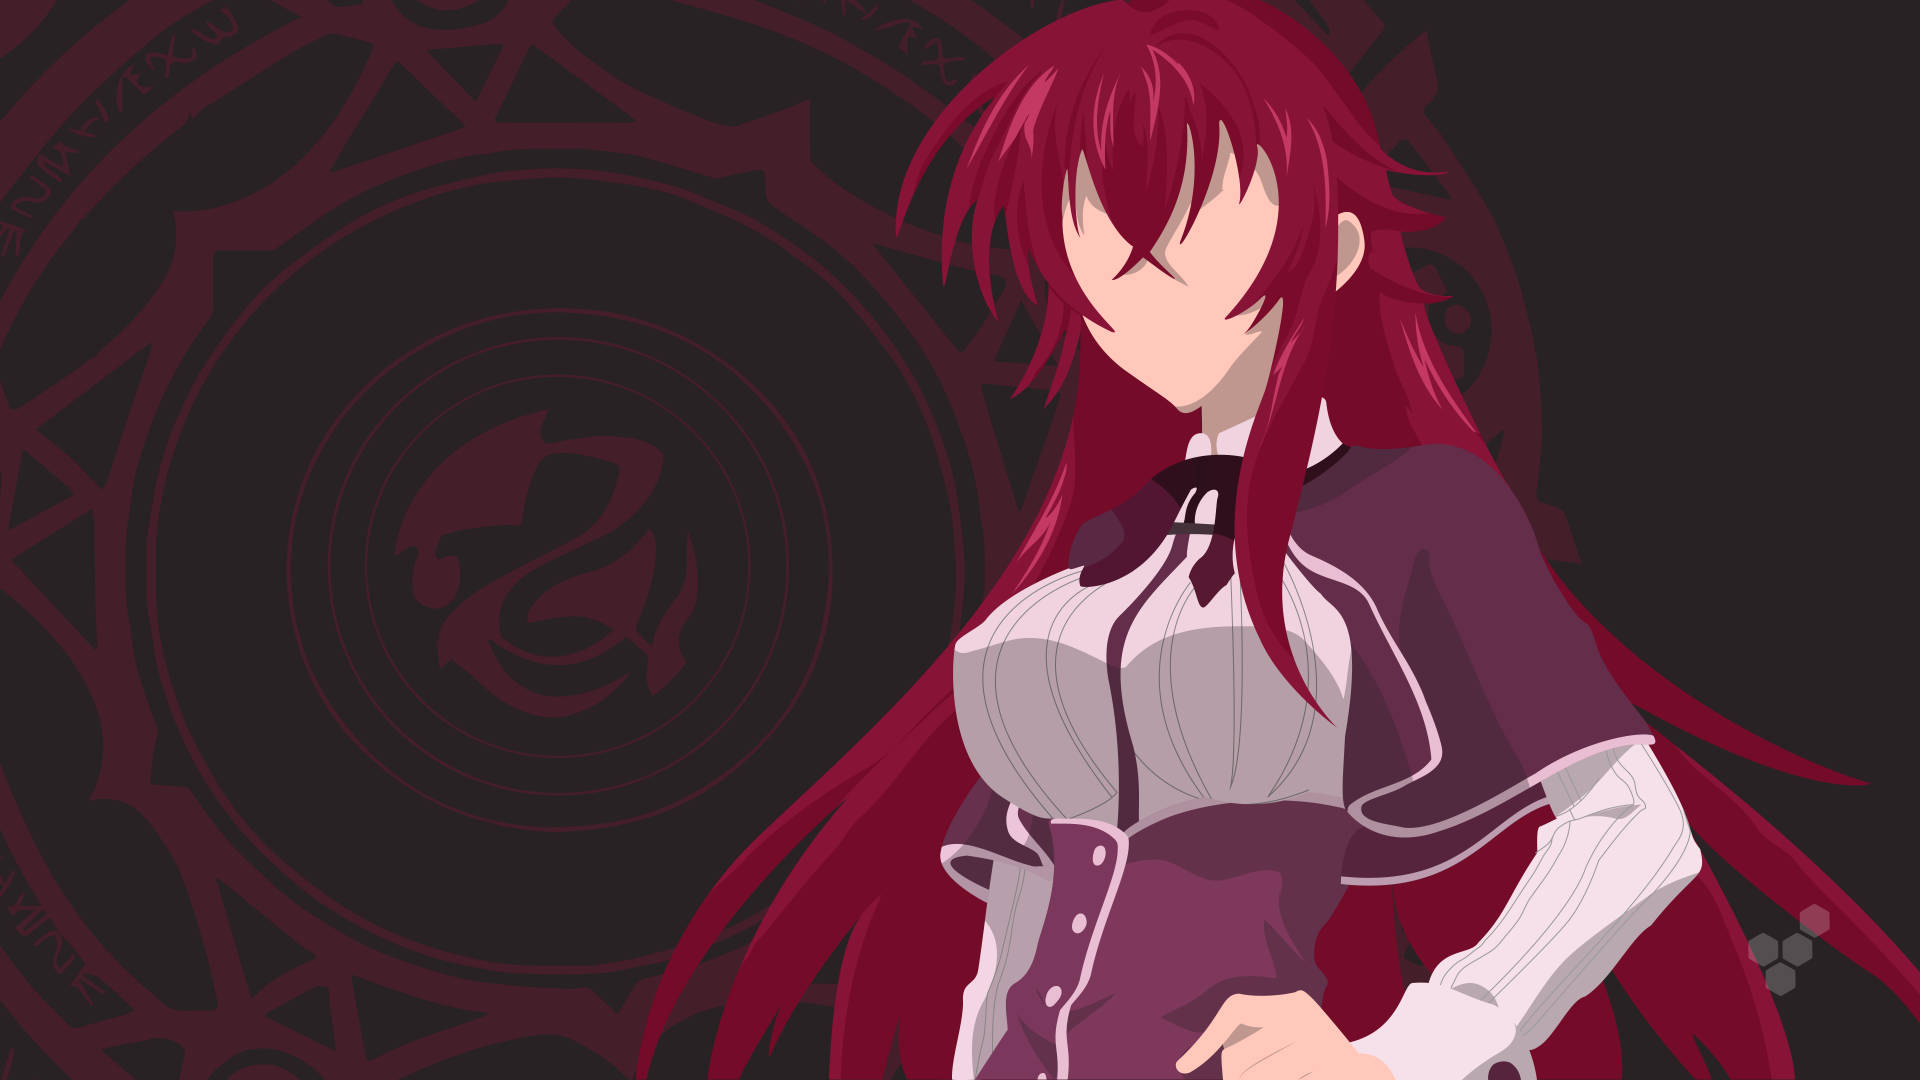 Rias Gremory ready to cast a spell from Highschool DxD Wallpaper